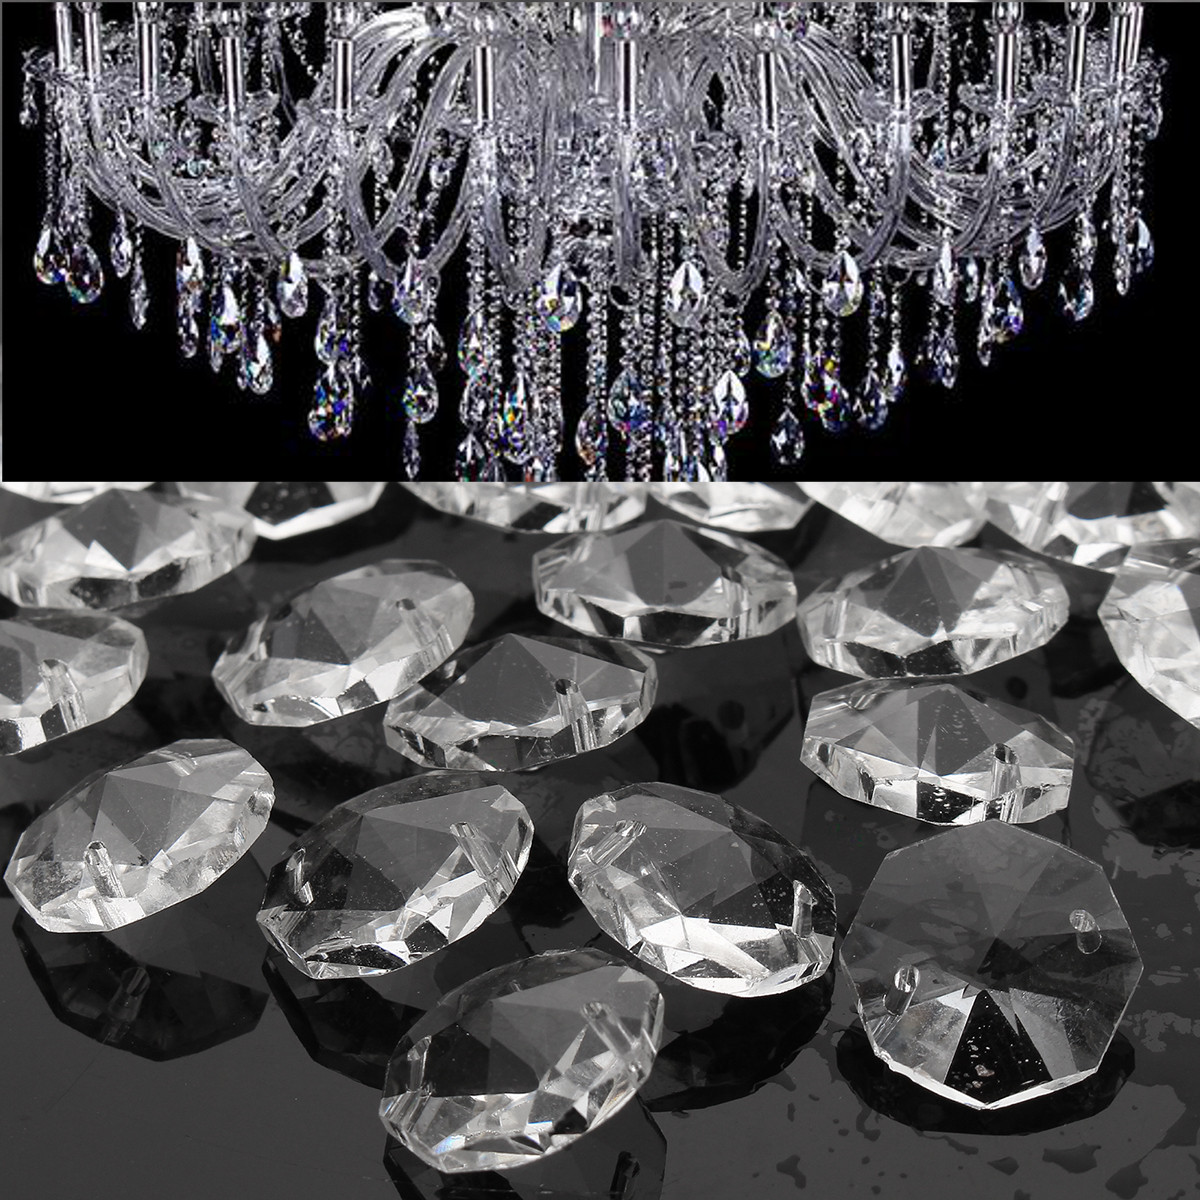 

50pcs Clear Glass Crystals Chandelier Pendant Lamp Prisms Parts Hanging Drops 18MM